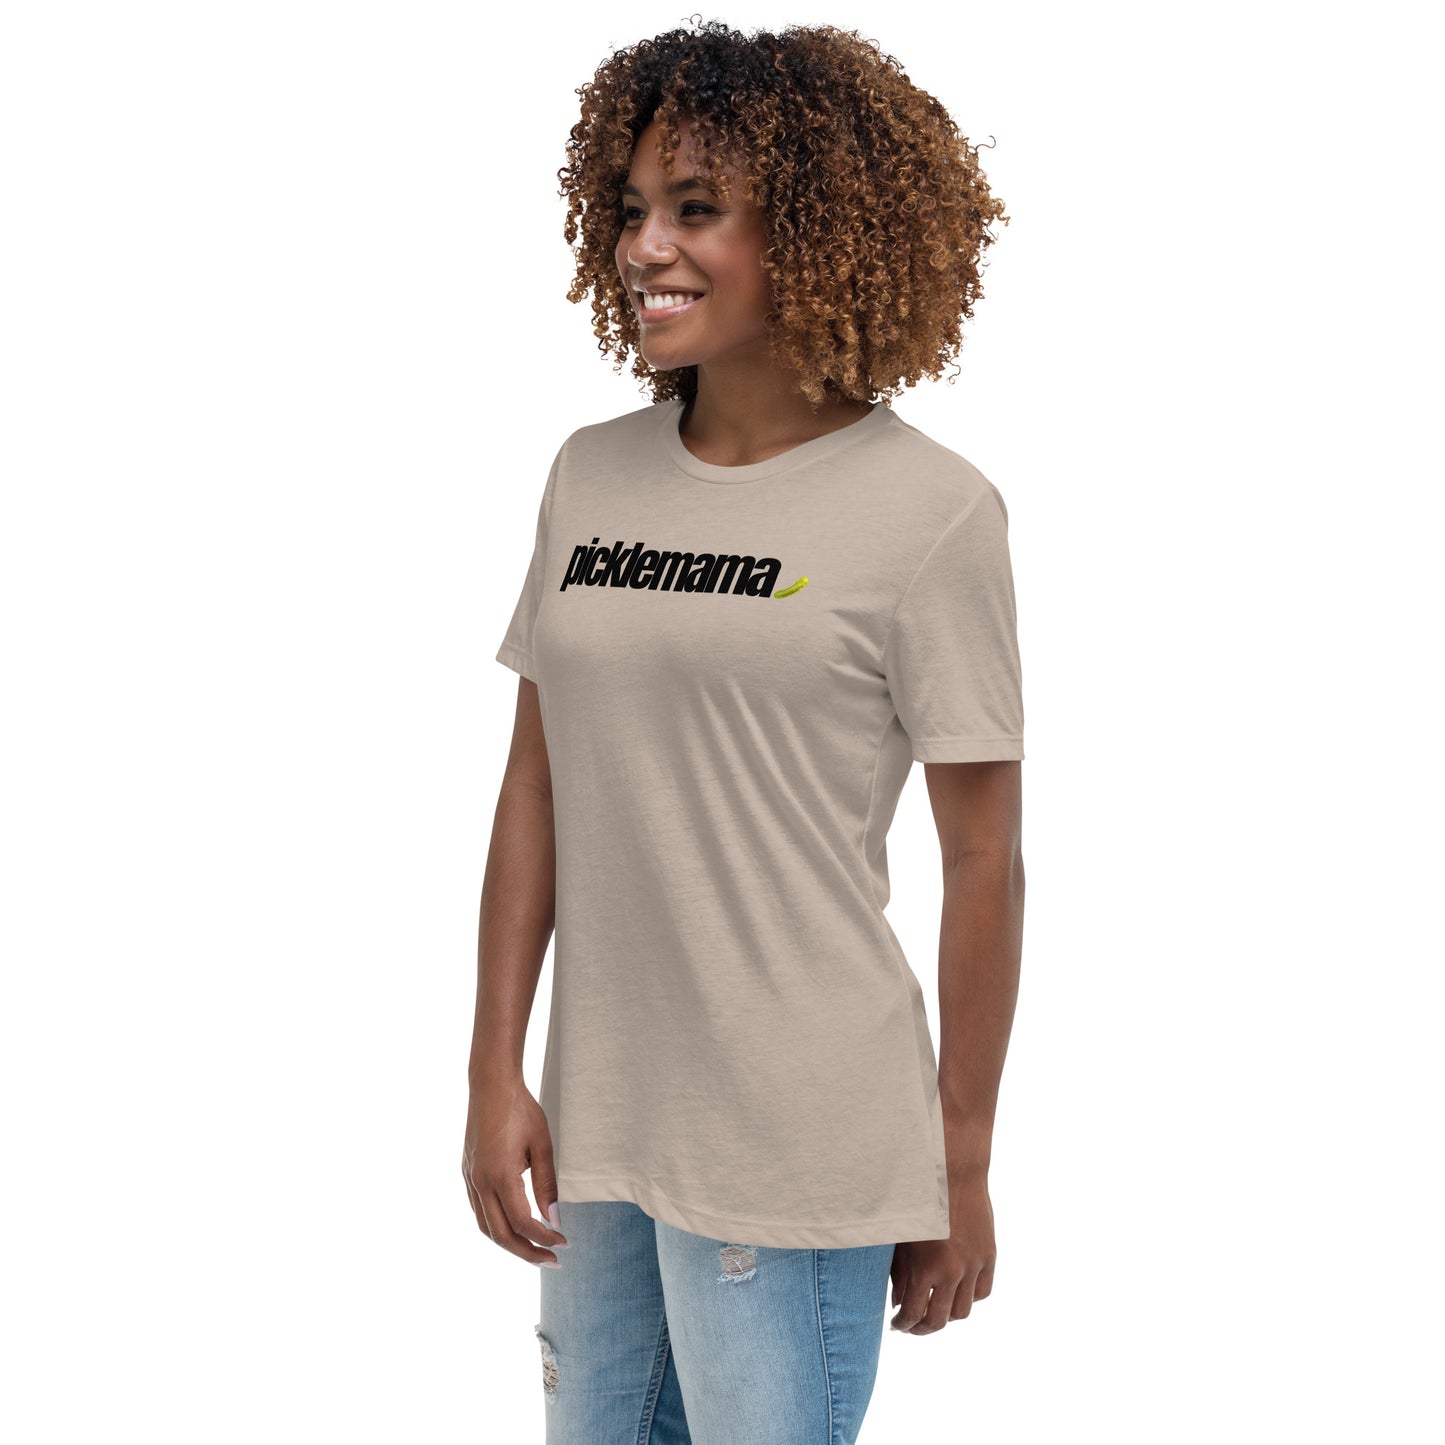 Relaxed Picklemama T-Shirt